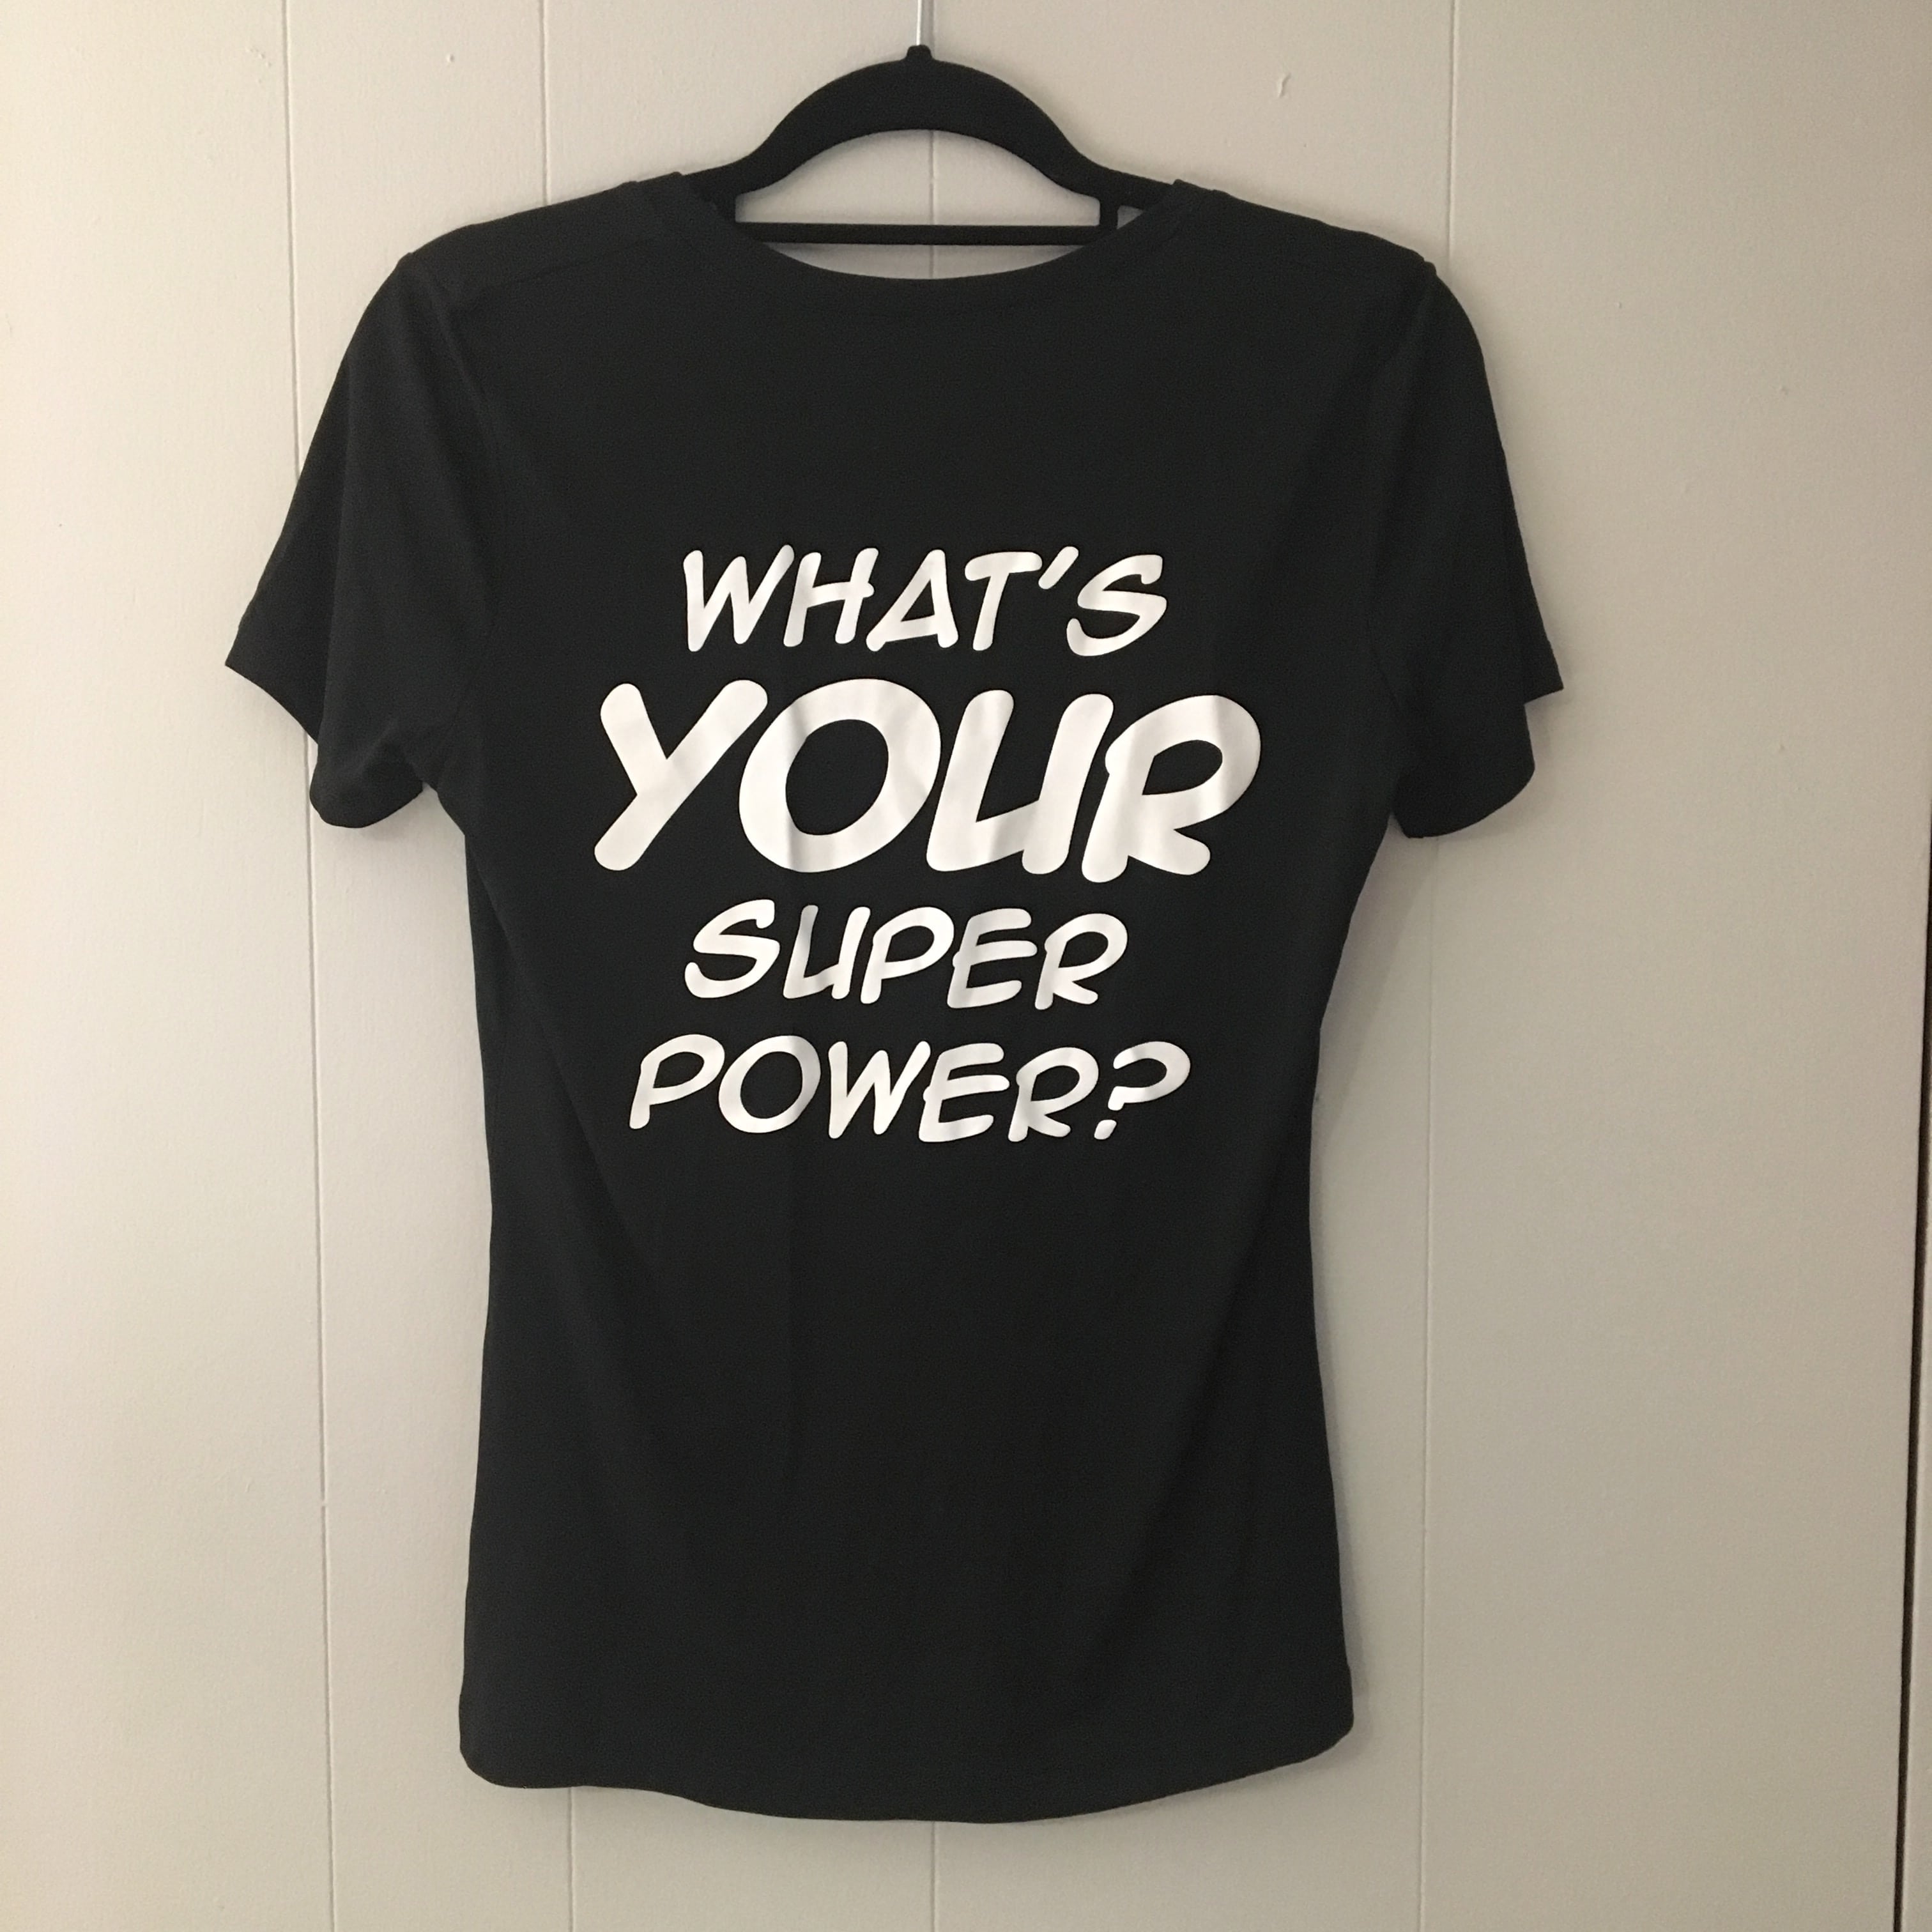 Super Power - Women's T-Shirt | Styled, Listed, and Sold